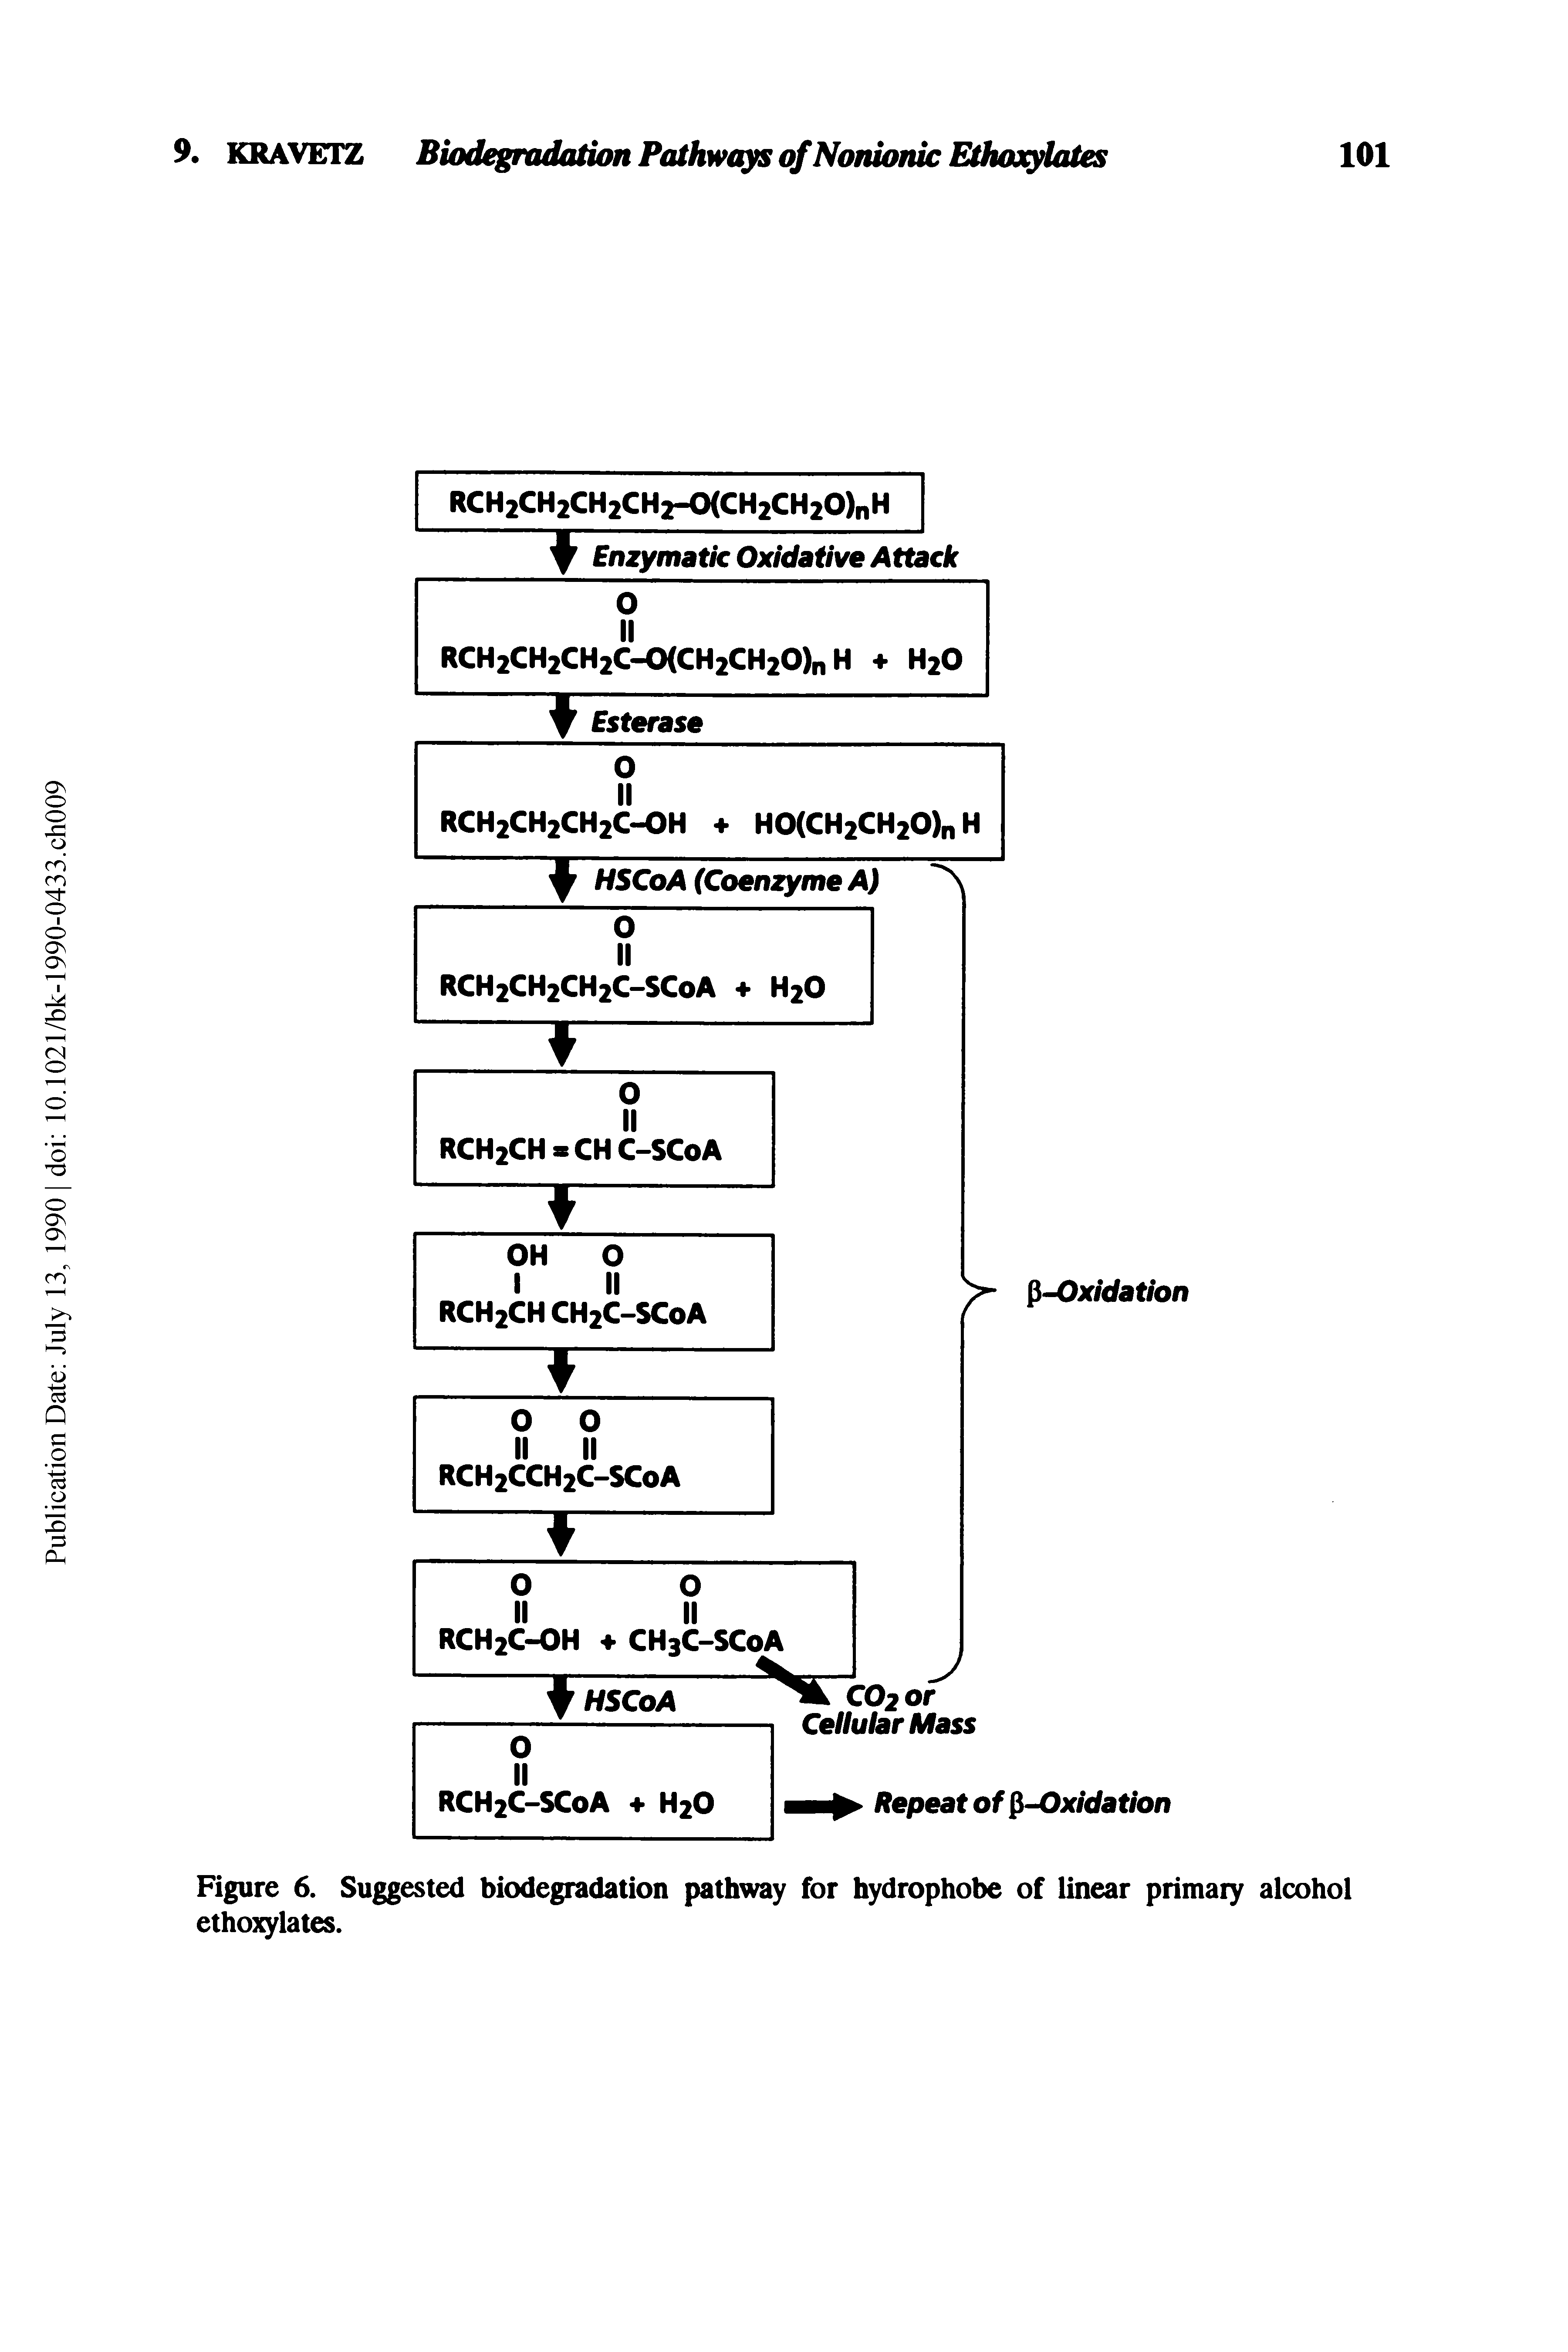 Figure 6. Suggested biodegradation pathway for hydrophobe of linear primary alcohol ethoxylates.